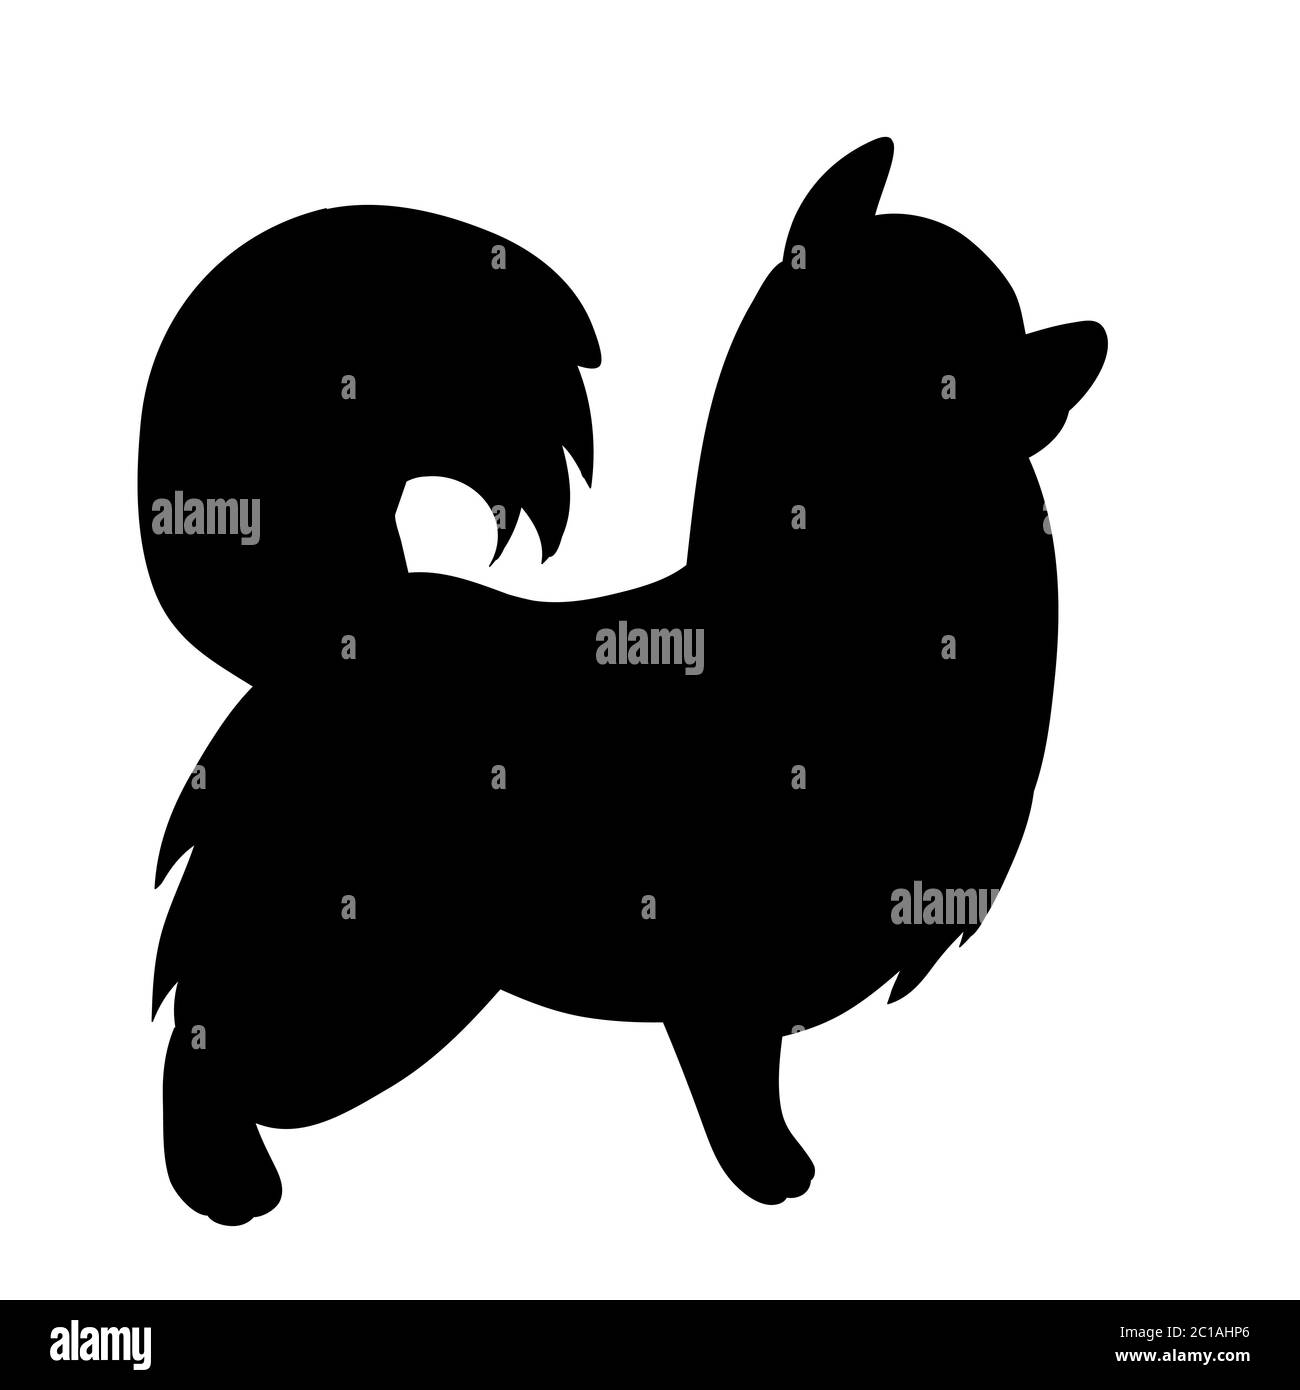 black silhouette of a small dog standing Stock Vector